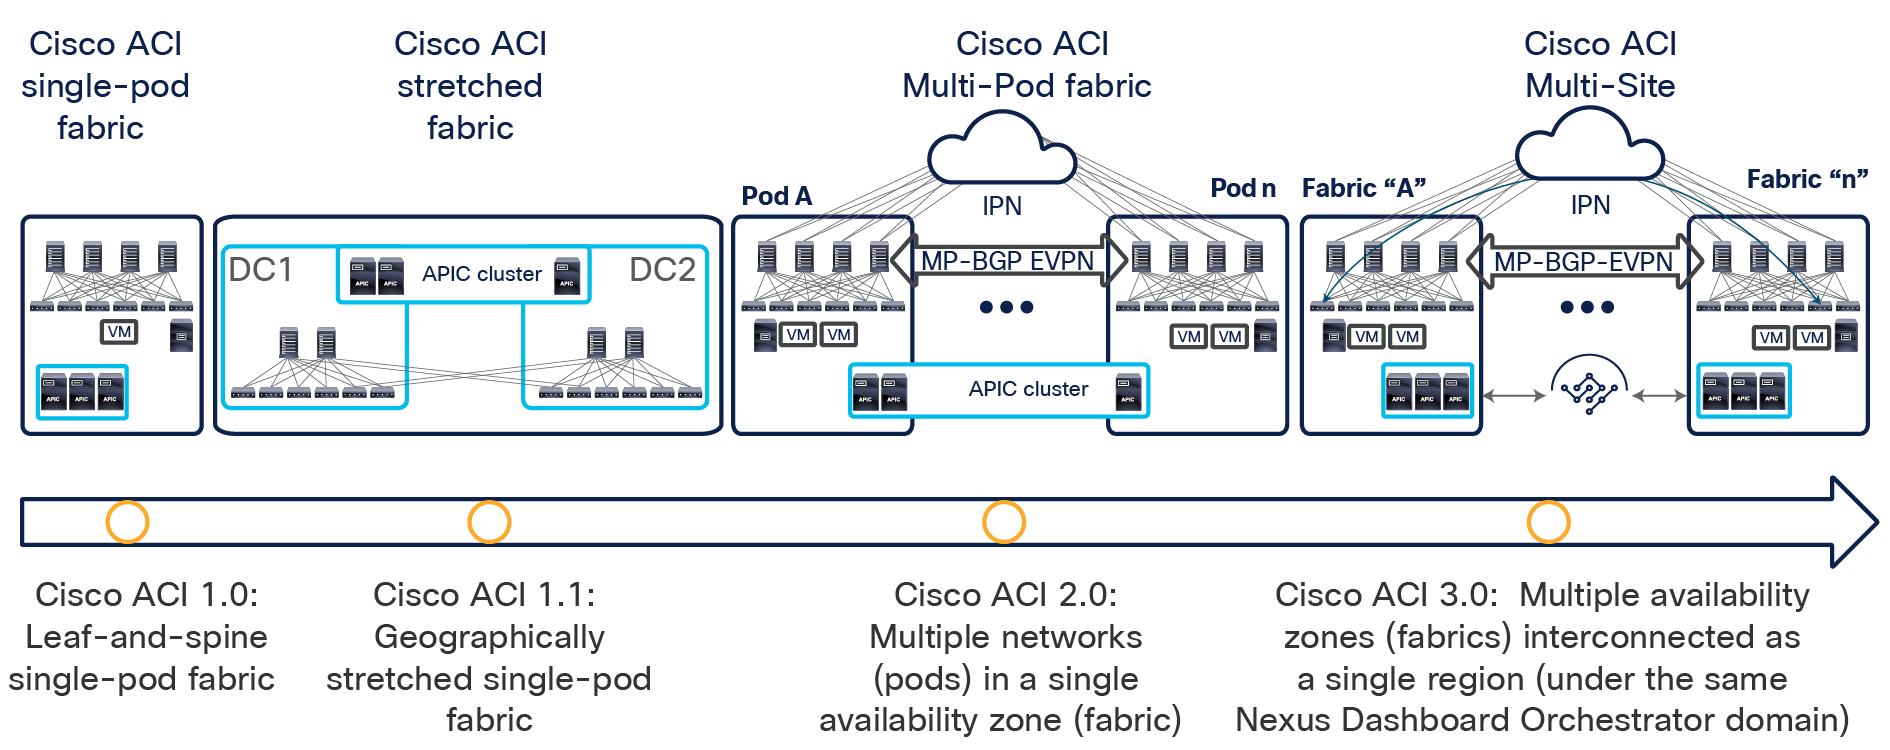 Cisco ACI connectivity options and policy domain evolution